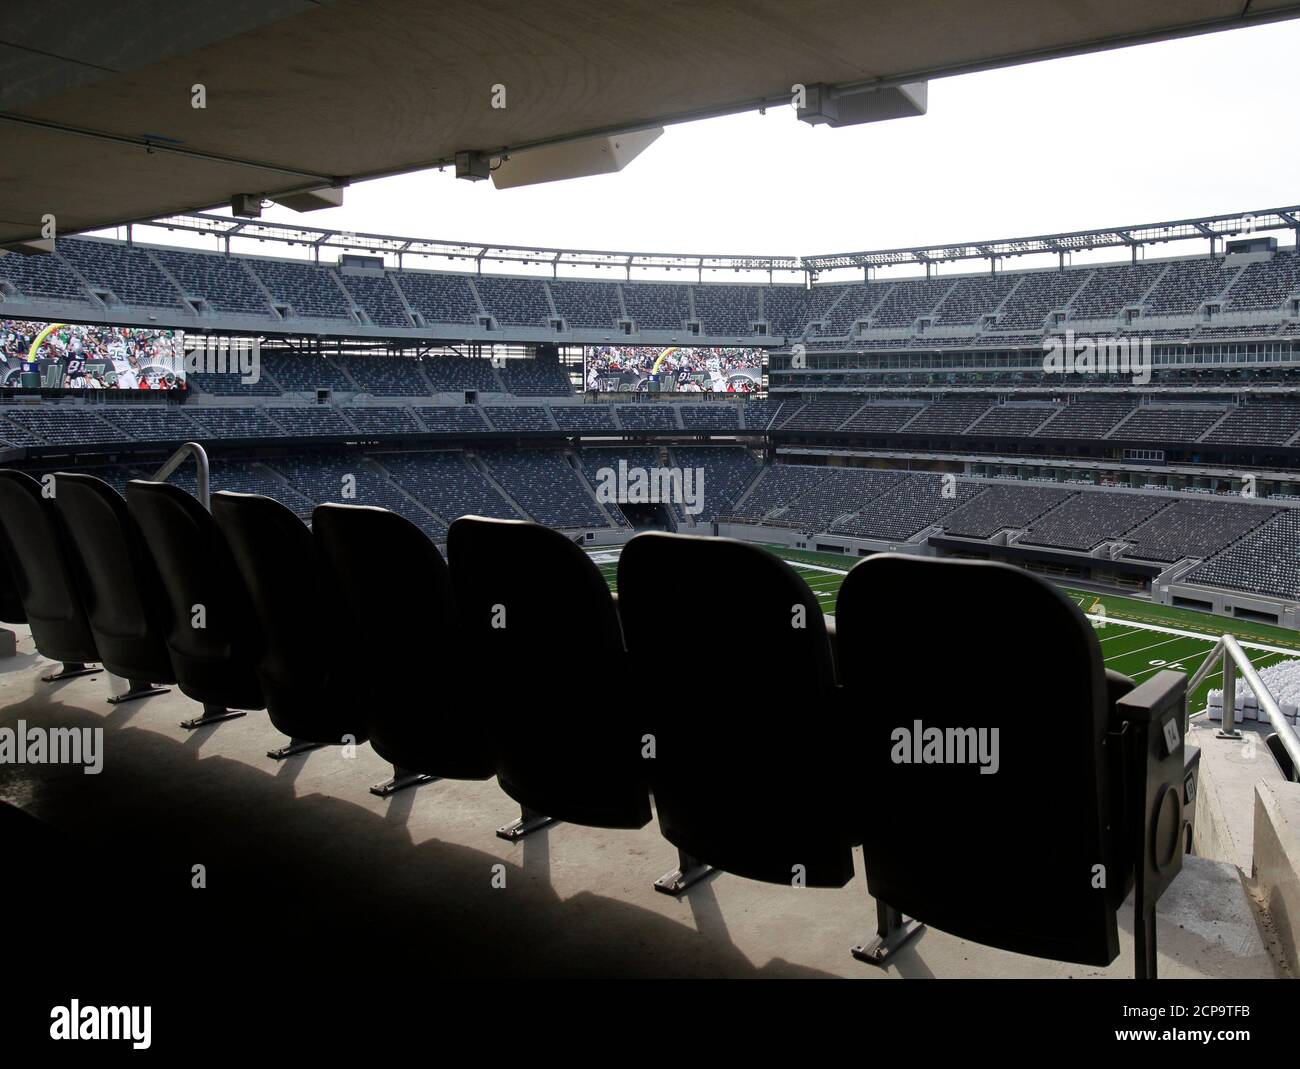 The New Meadowlands Stadium for the New York Jets and New York Giants football teams is seen in East Rutherford, New Jersey,December 8, 2009.  REUTERS/Shannon Stapleton  (UNITED STATES)  FOR RPA Stock Photo